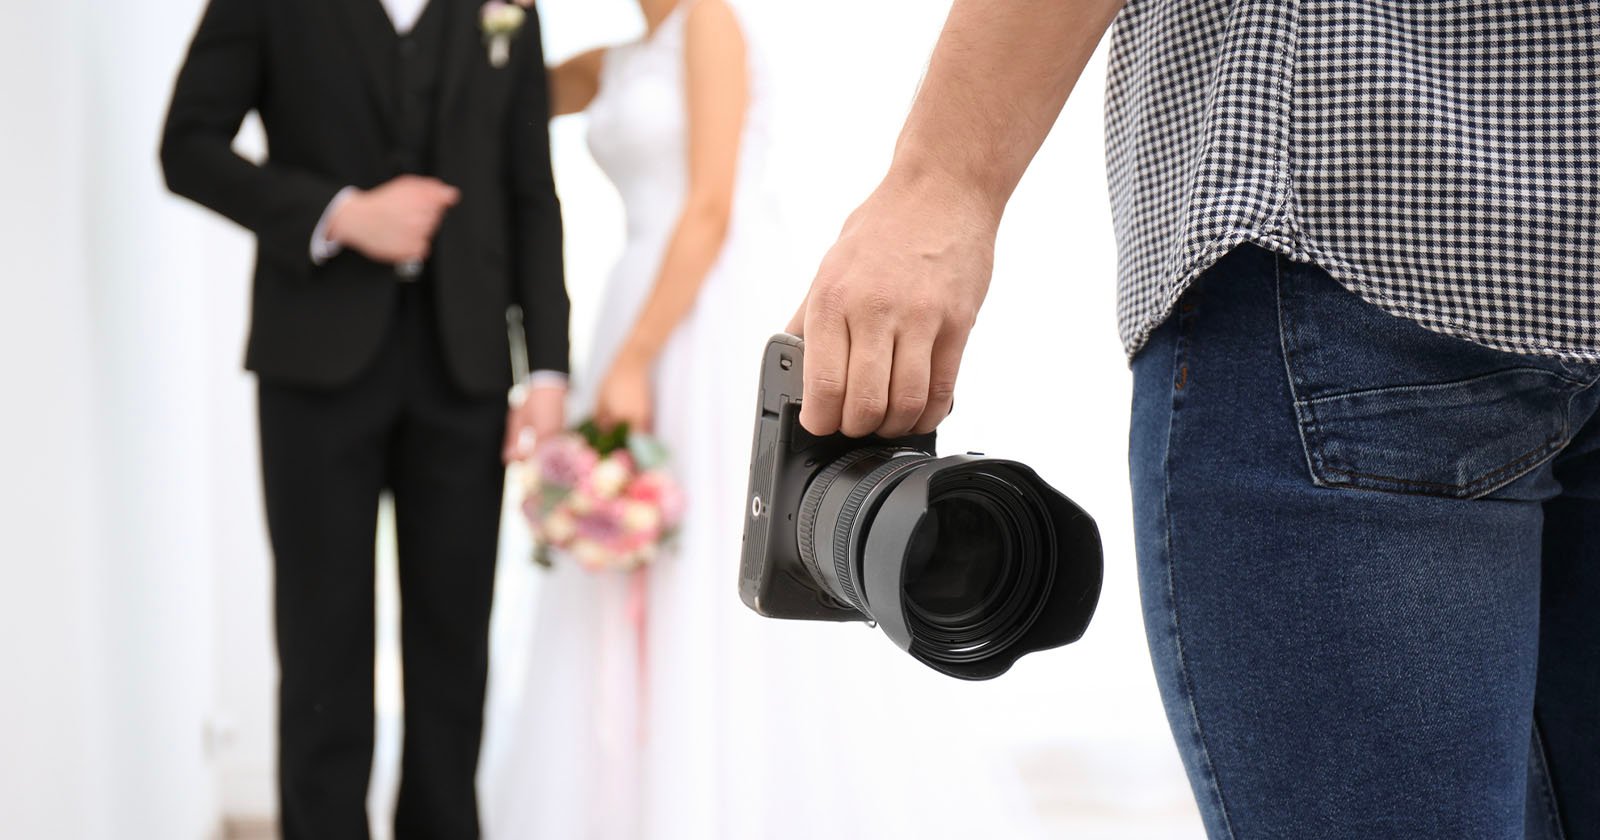  wedding photographers share warning signs couple will 